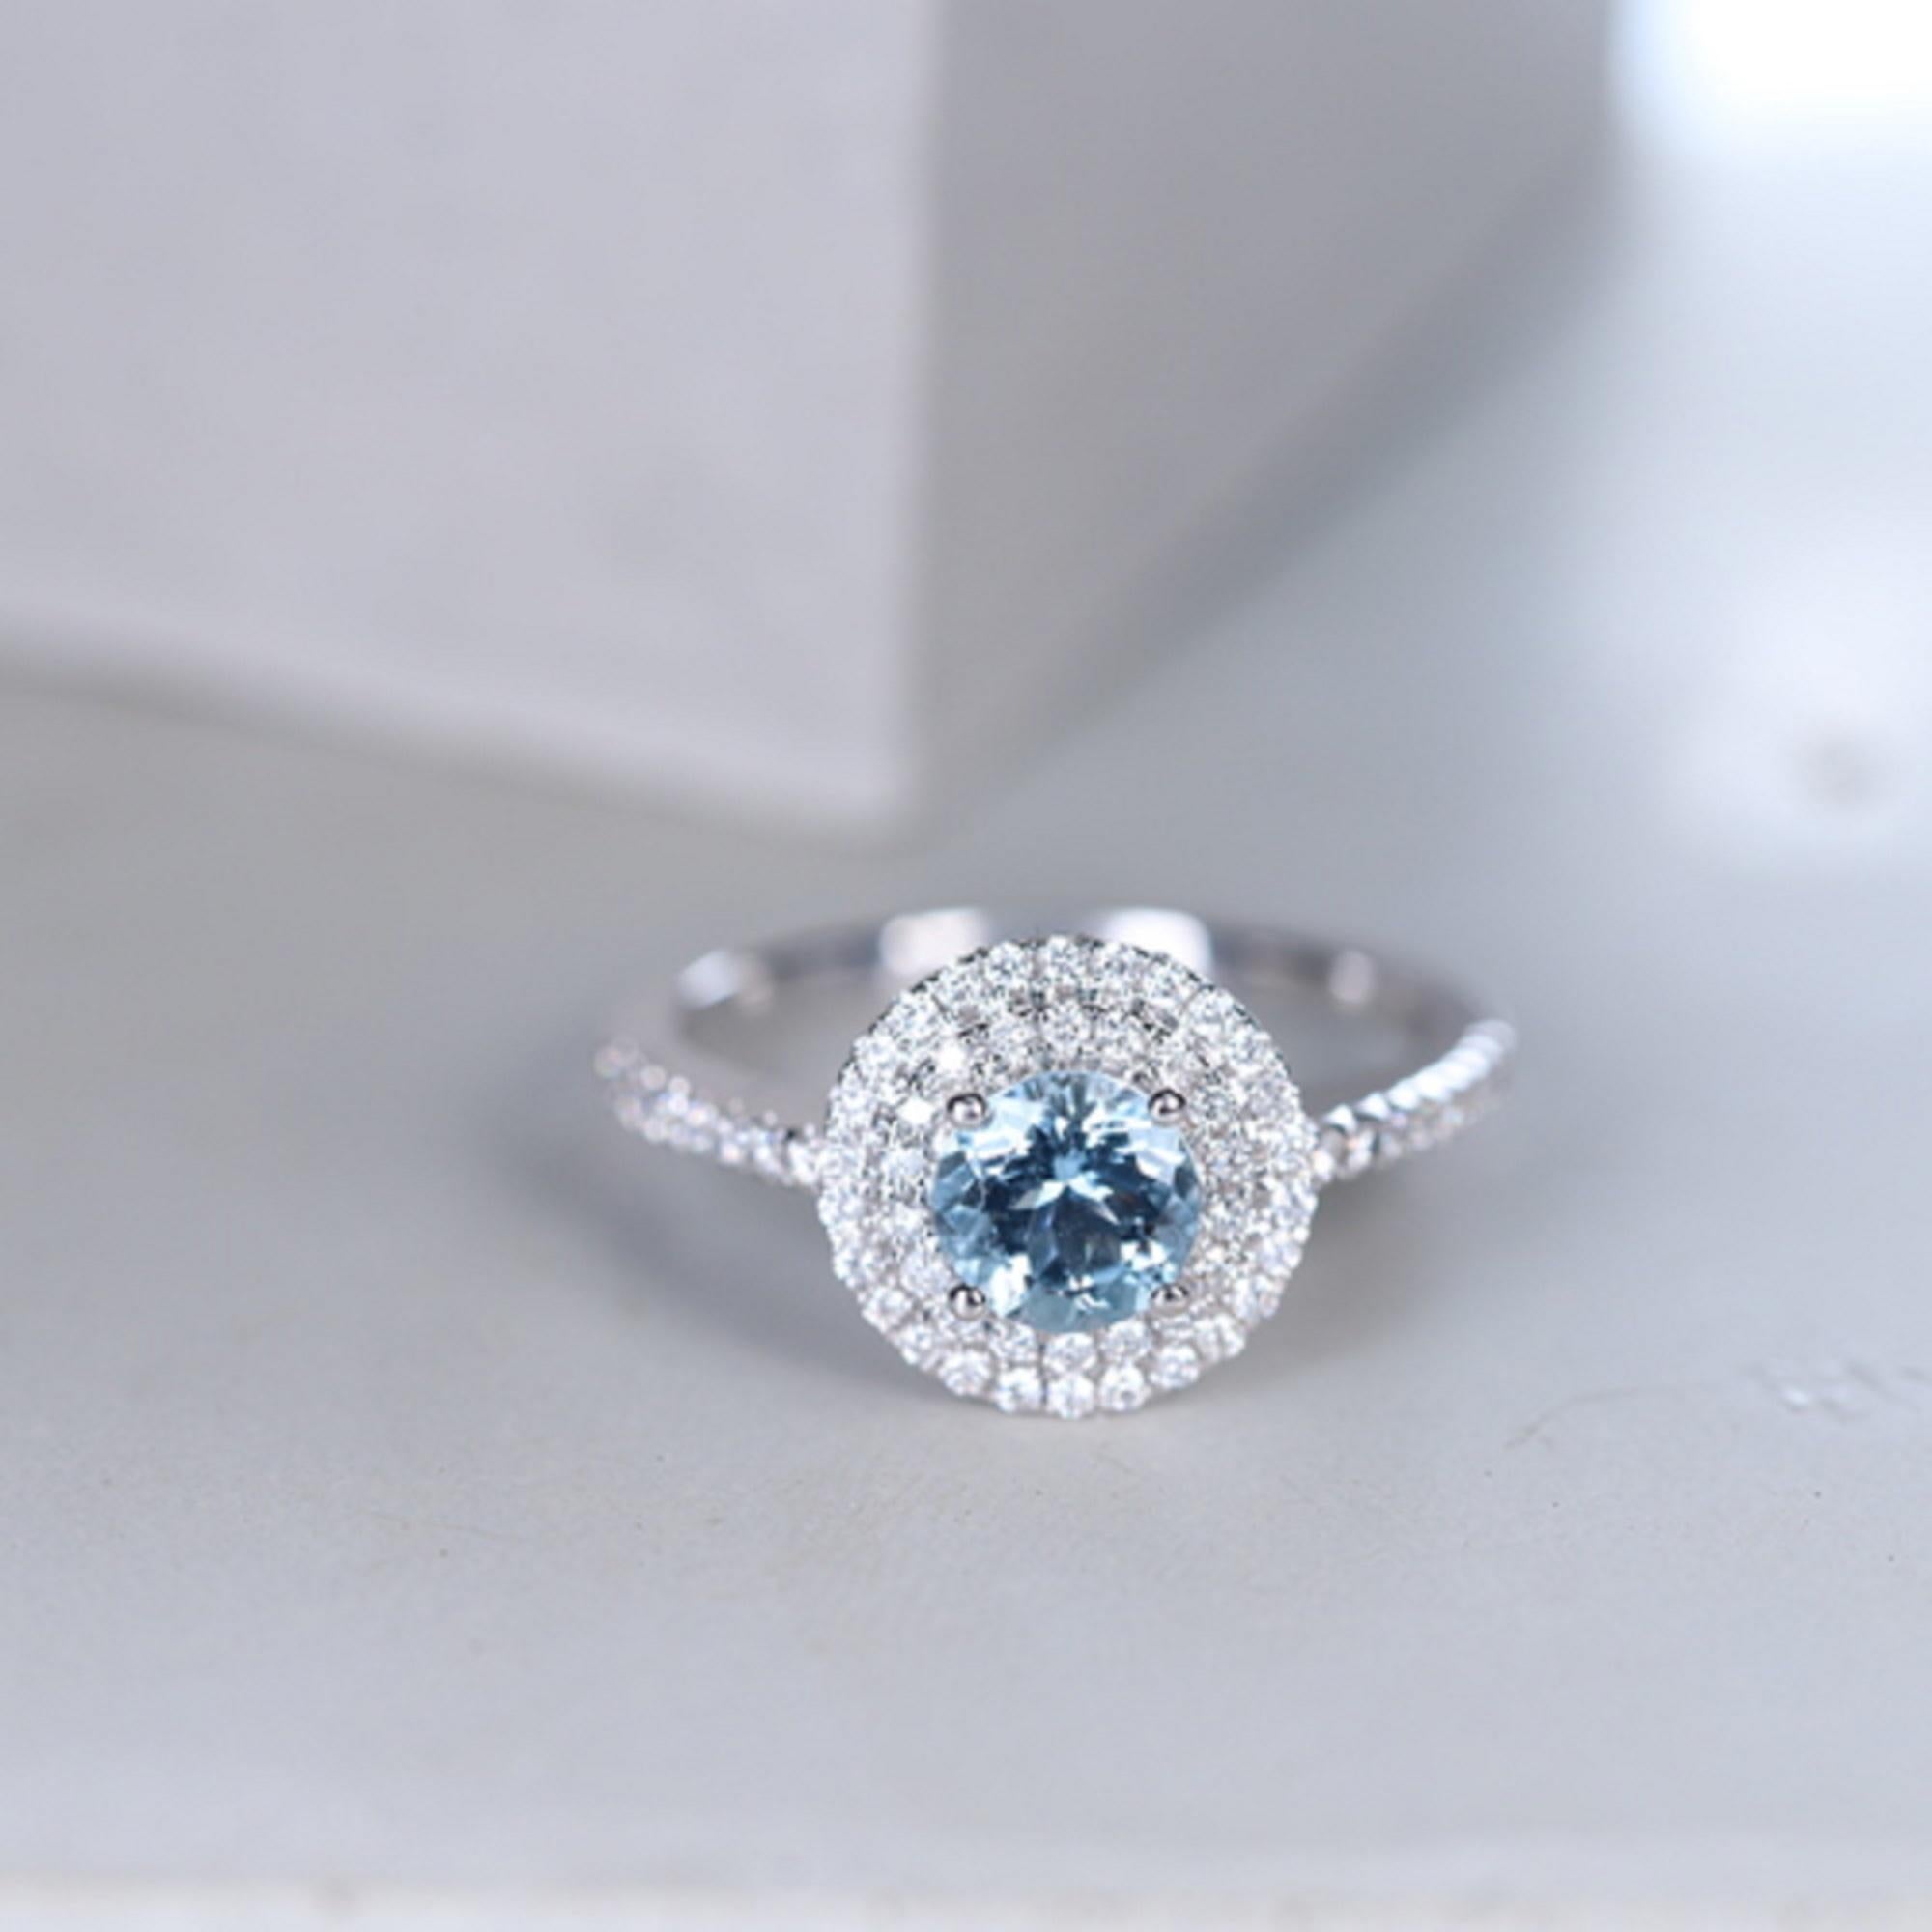 Stunning, timeless and classy eternity Unique Ring. Decorate yourself in luxury with this Gin & Grace Ring. The 14k White Gold jewelry boasts Round cut Prong Setting Genuine Aquamarine (1 pcs) 0.76 Carat, along with Natural Round cut white Diamond